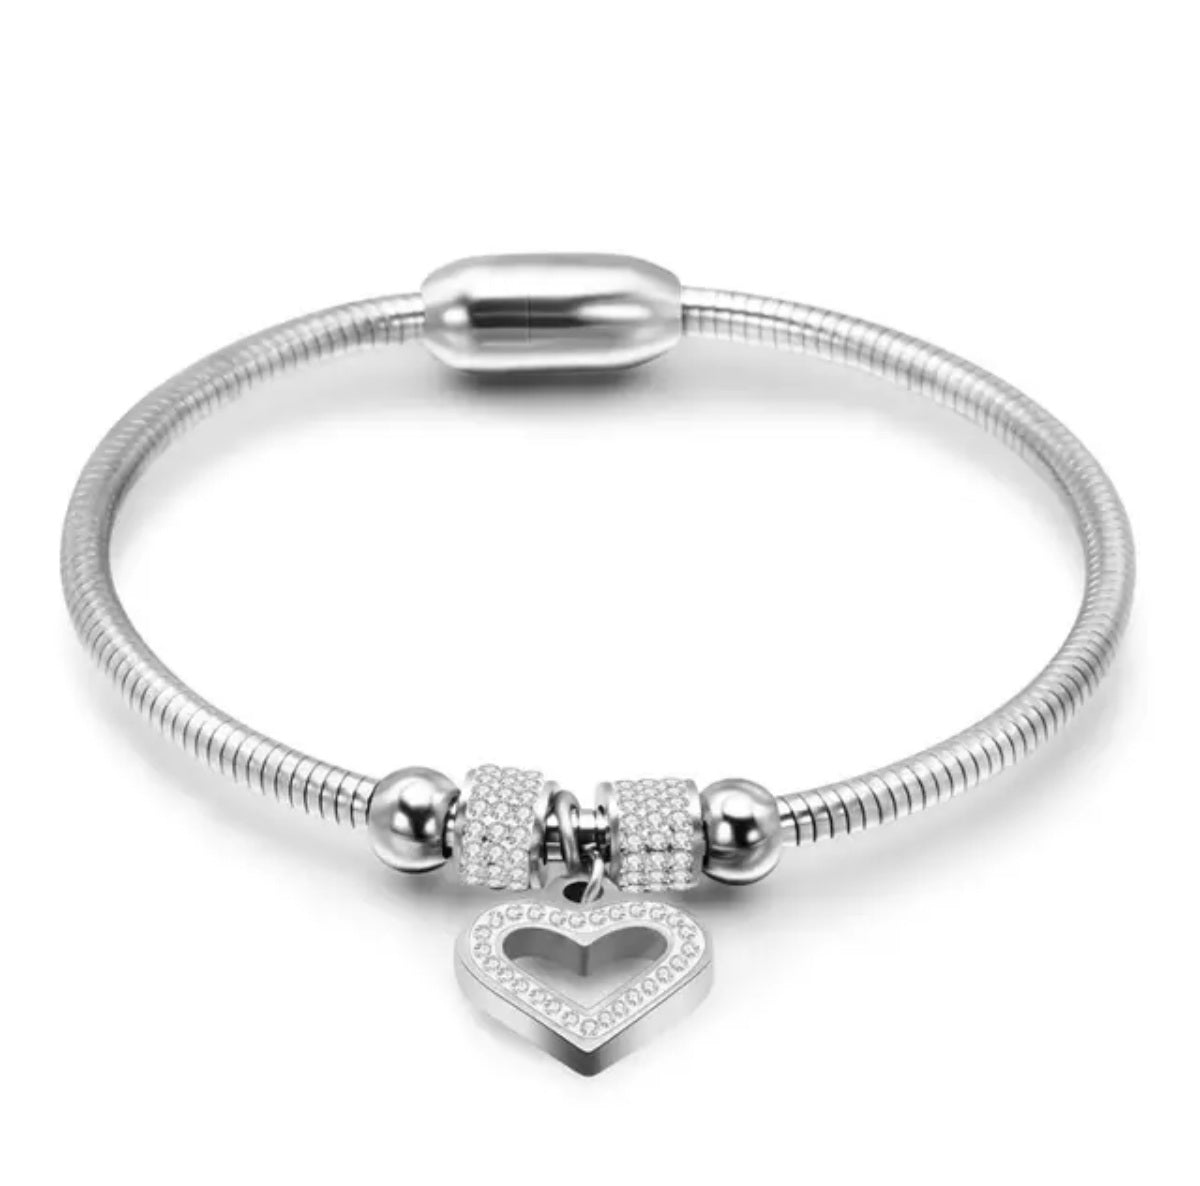 Heart Magnetic Bracelet 40% Off. Just add it to the cart and see a discount.